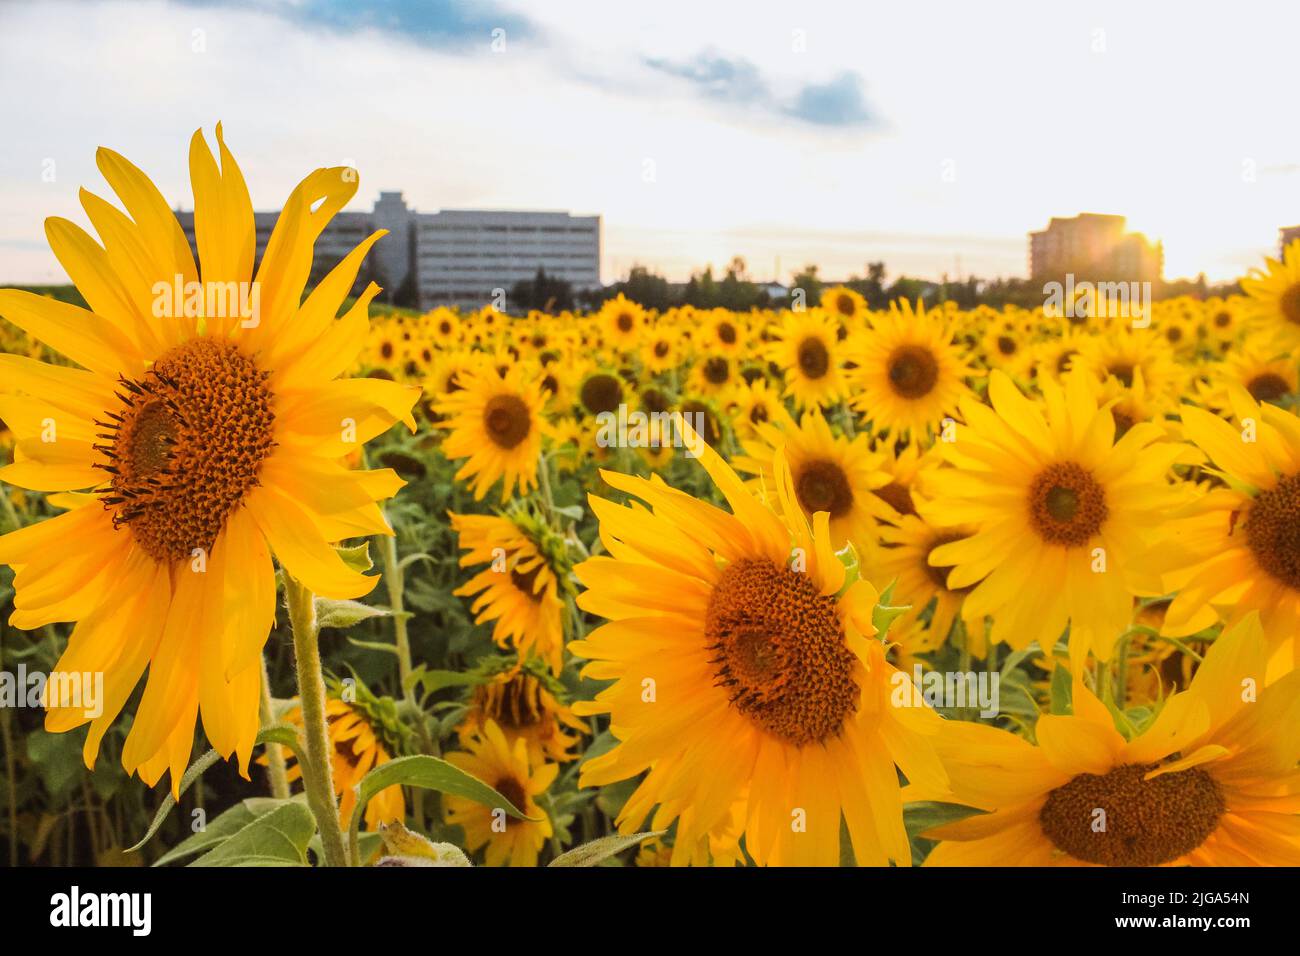 sunflower field over cloudy blue sky and bright sun lights. Stock Photo